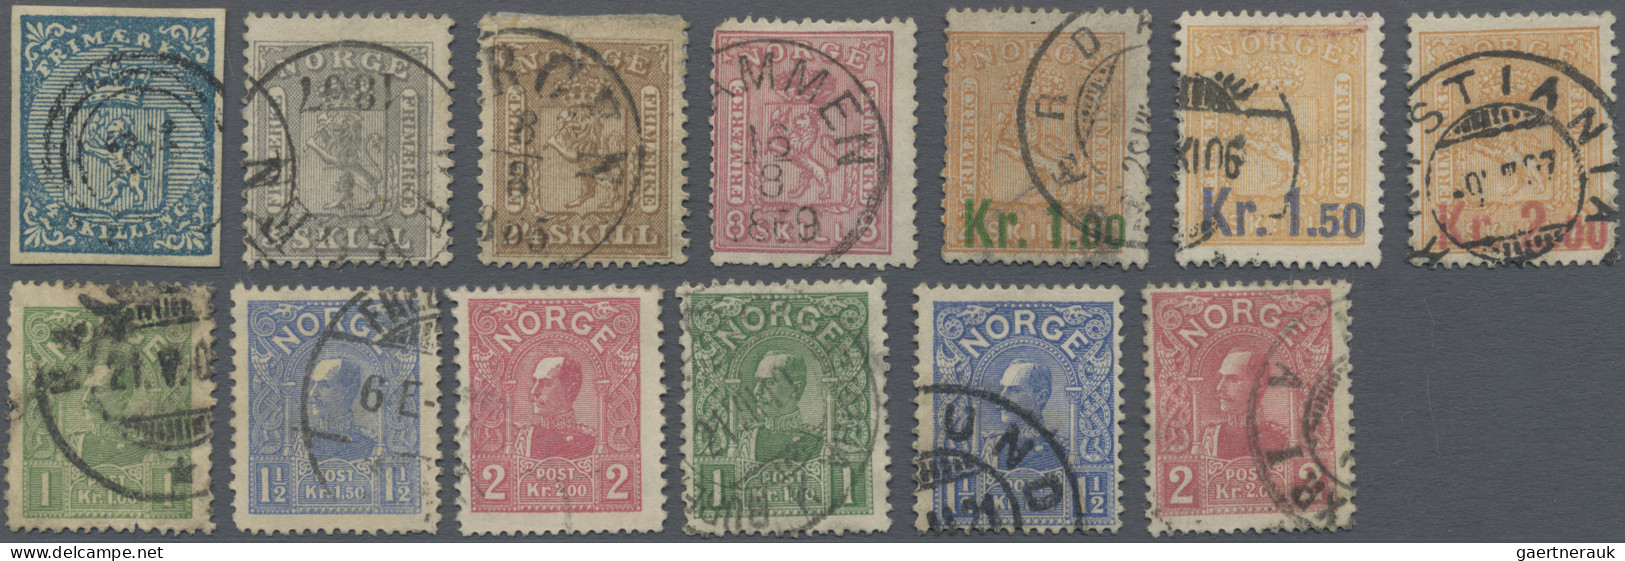 Norway: 1855/1909, Fine Used Lot Of 13 Stamps Incl. Michel Nos. 1, 7, 10, 15, 62 - Usados